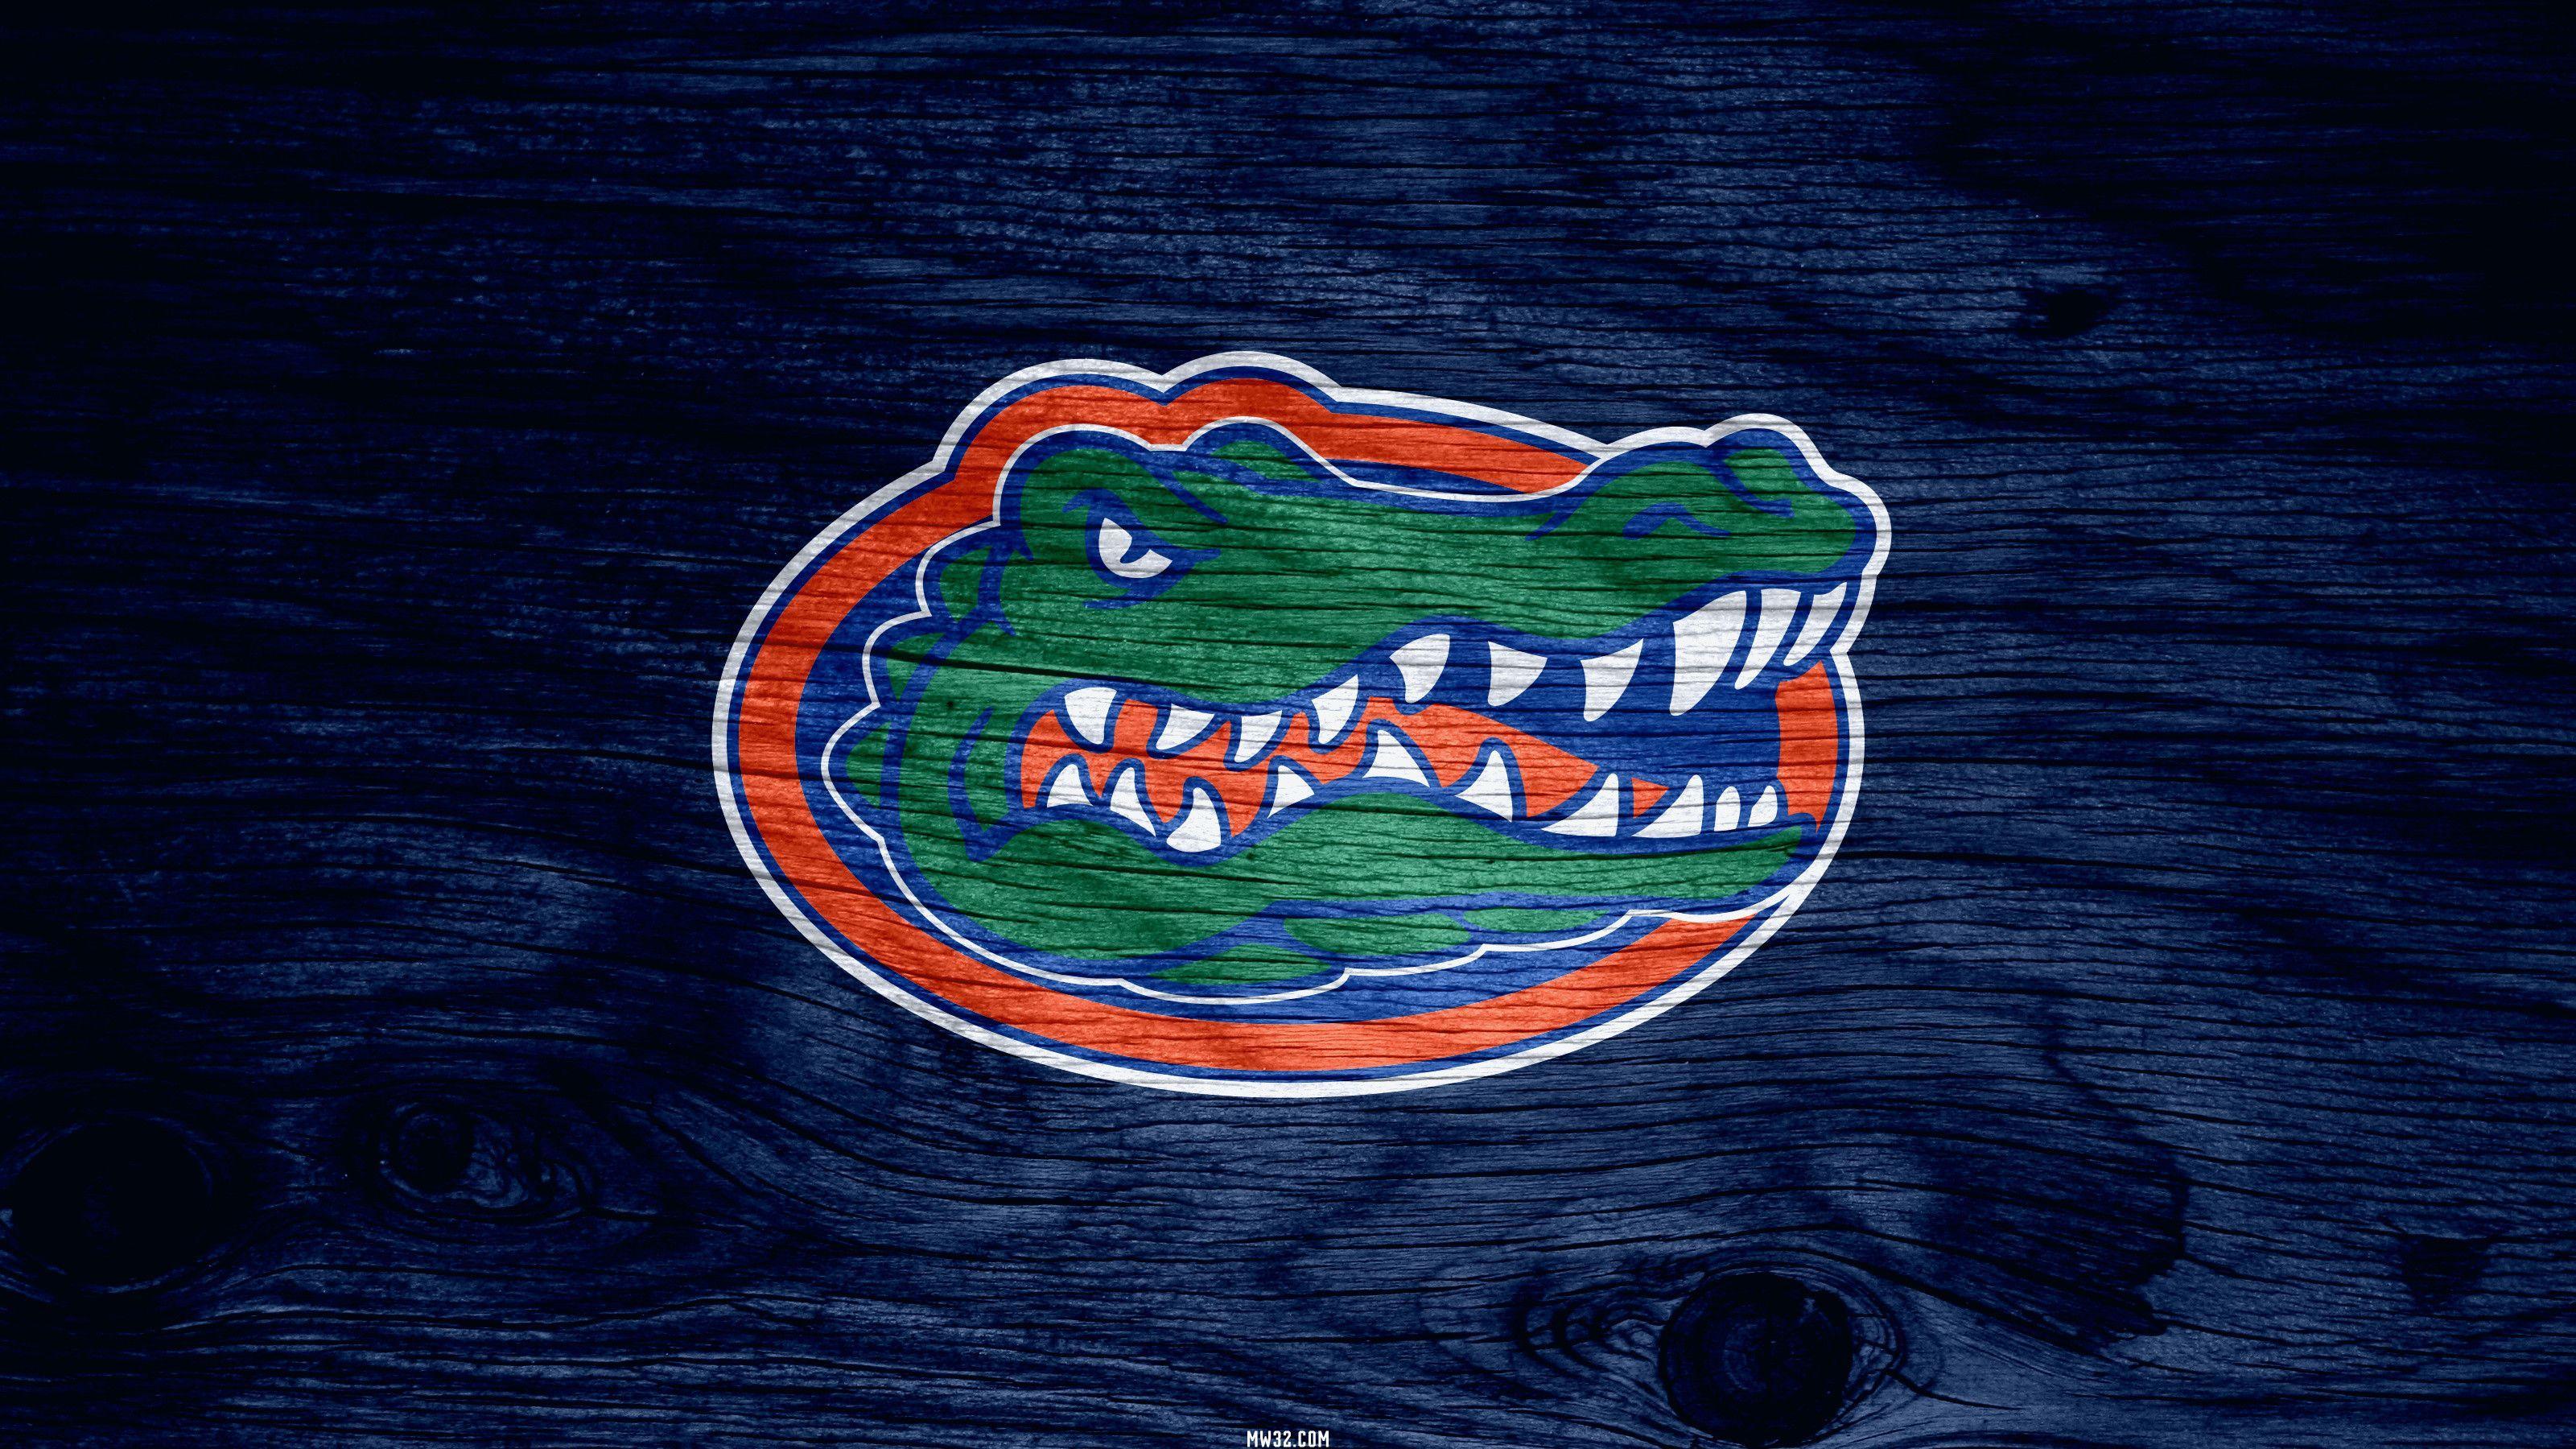 Pics For > University Of Florida Gators Wallpaper. It's Great To